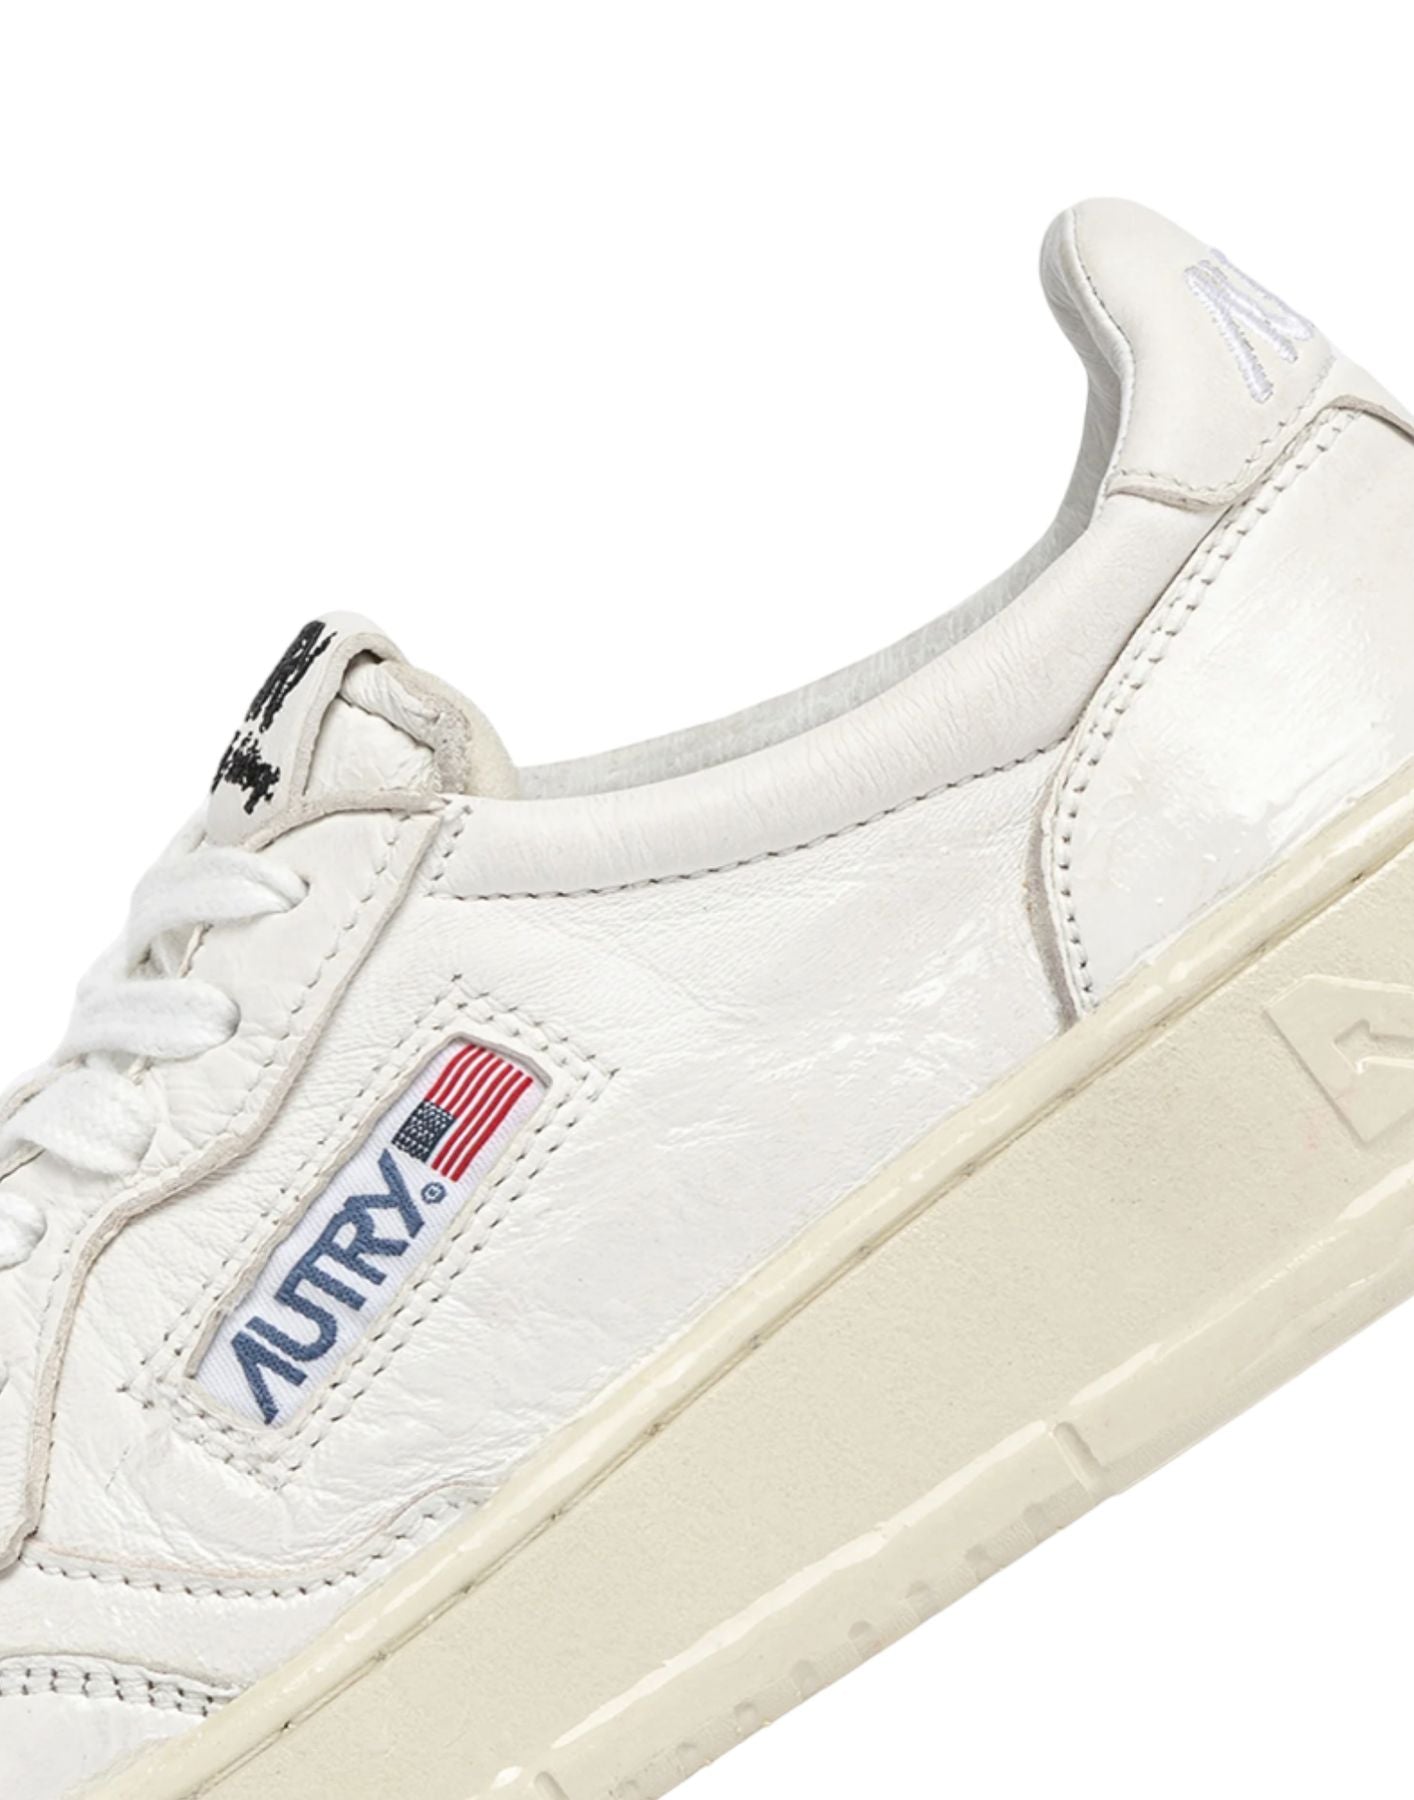 Sneakers woman AVLW GR06 white Autry